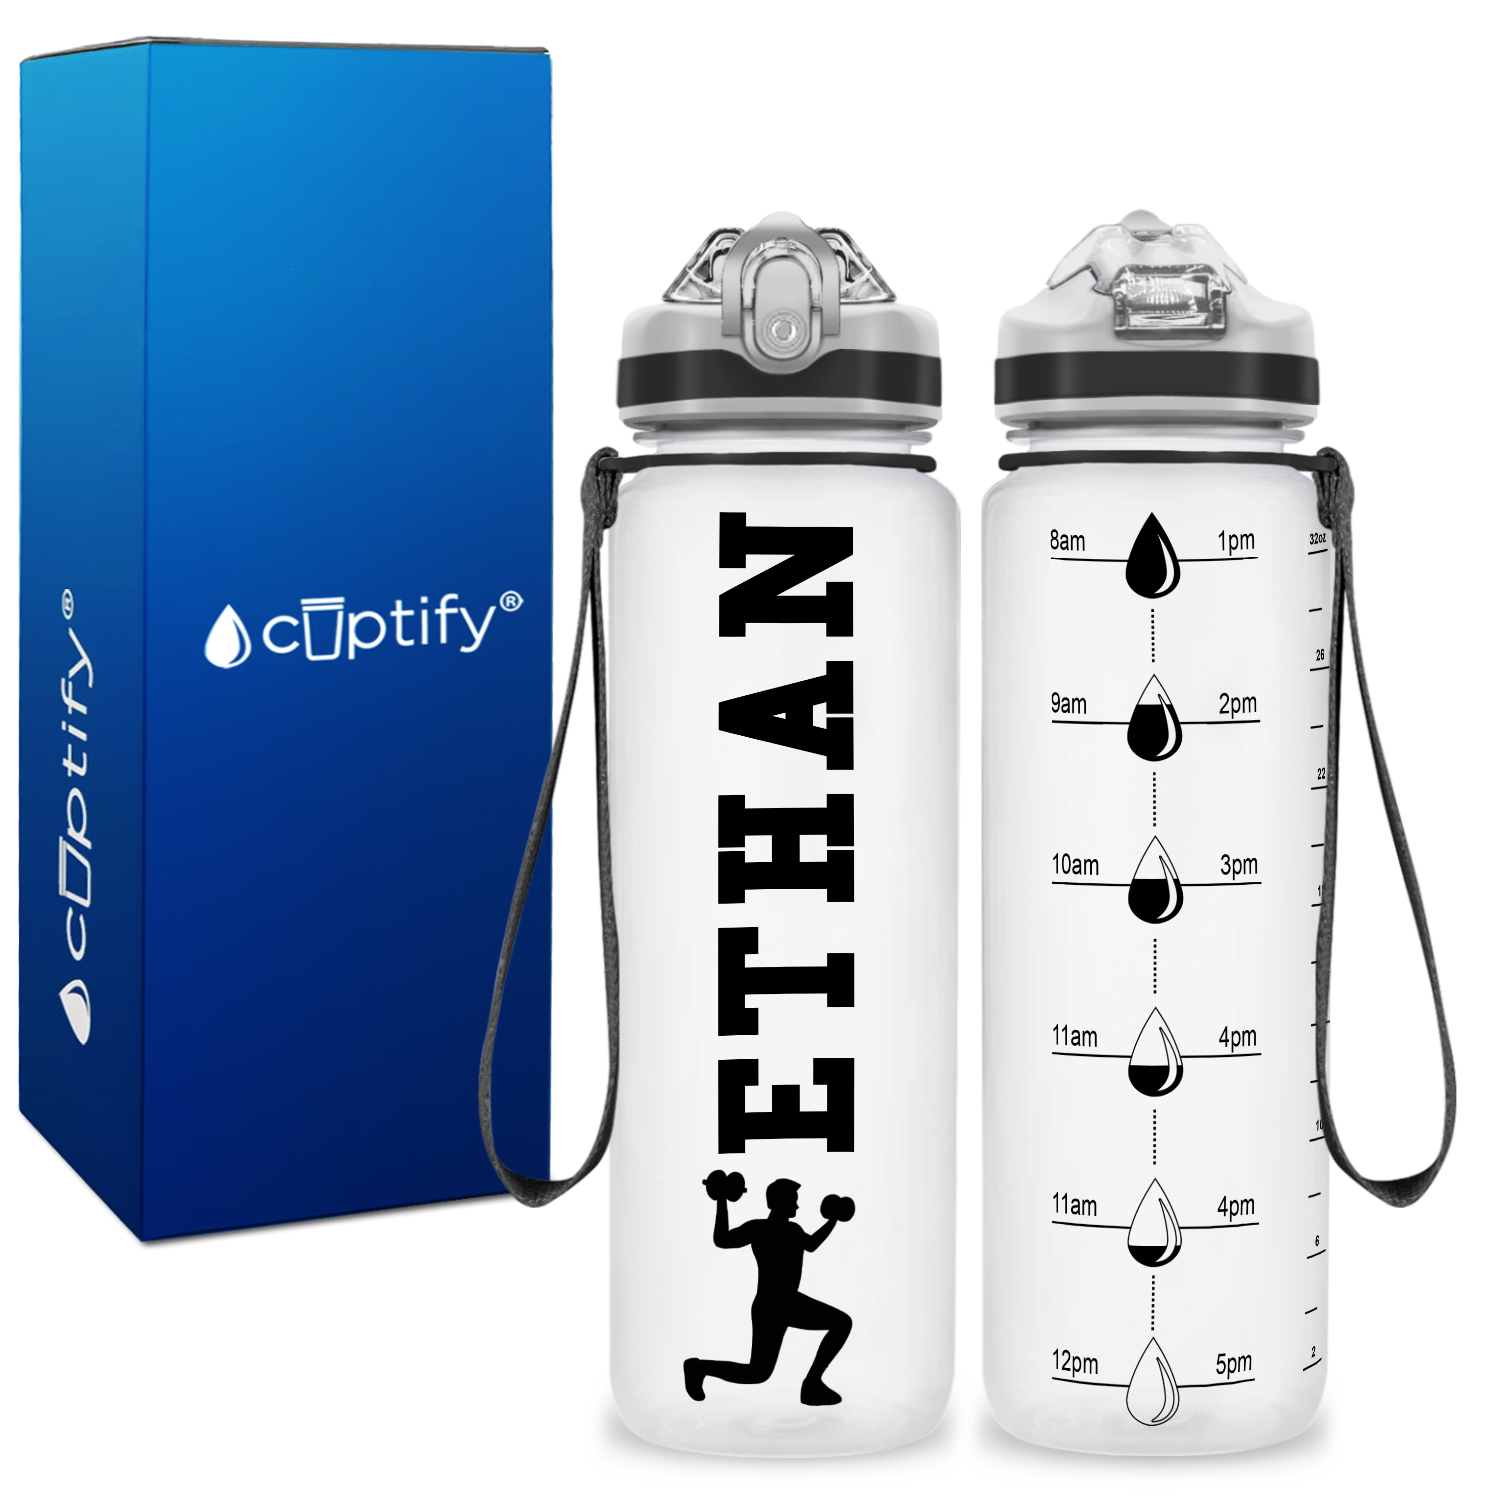 Personalized Male Lifting Weights on 20 oz Motivational Tracking Water Bottle